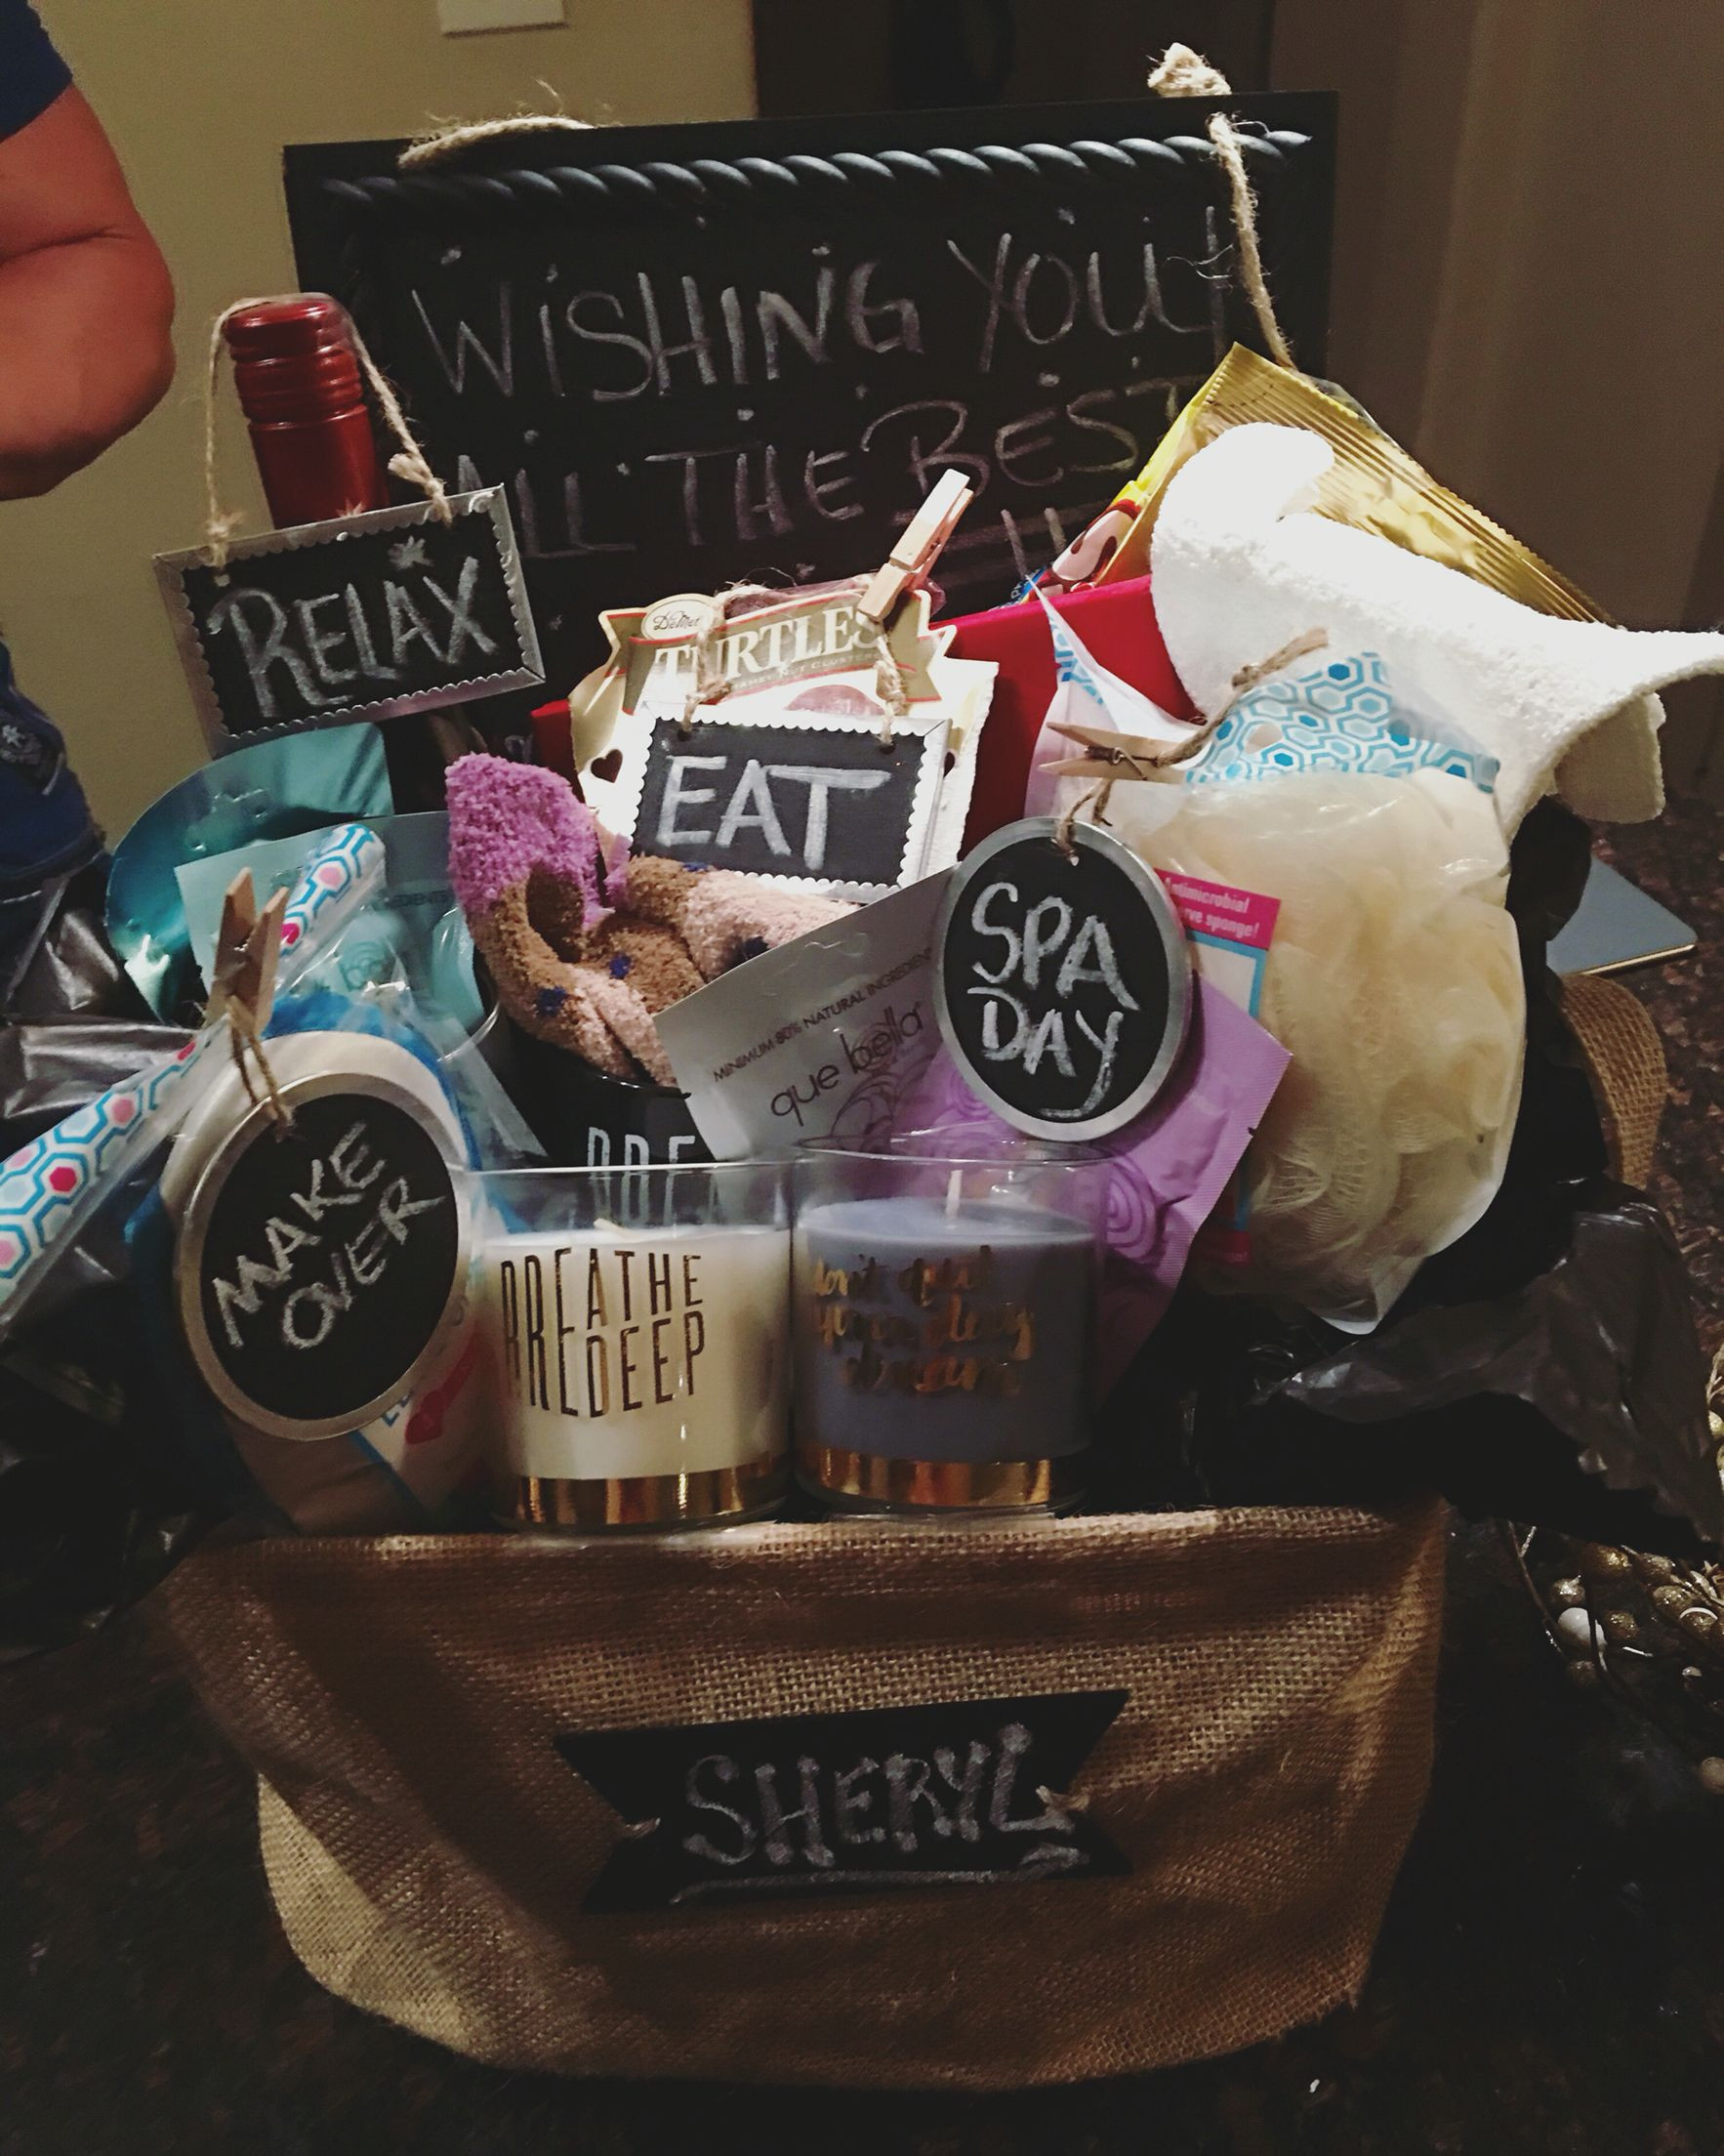 Gift Baskets For Coworkers Ideas
 Farewell t basket for my coworker emergency kit for